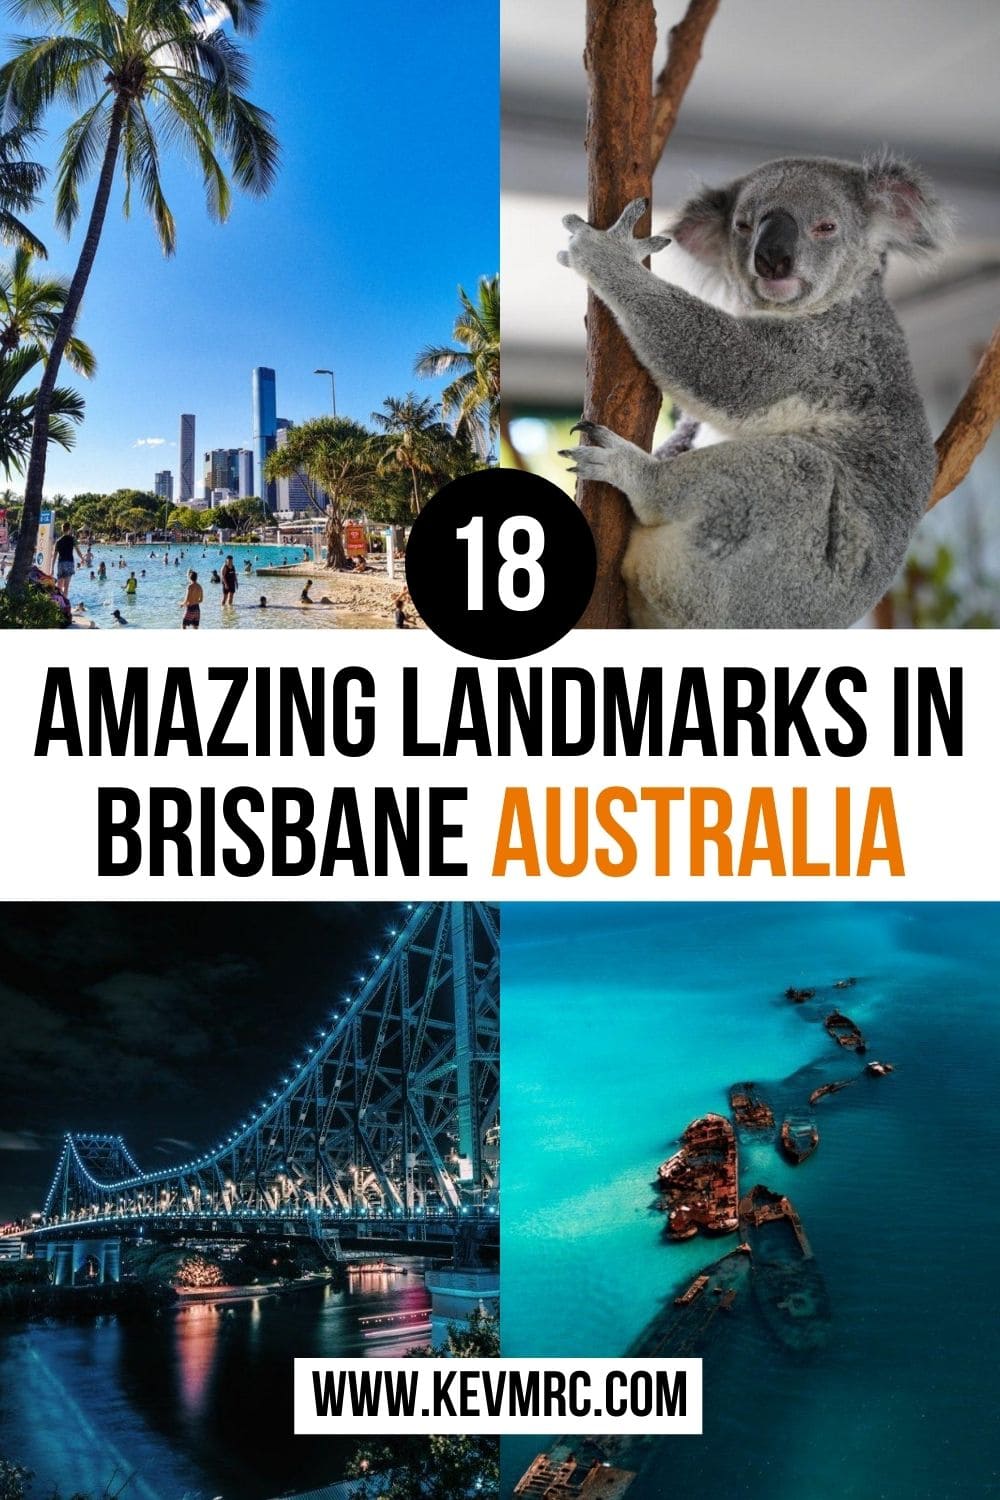 18 Amazing Landmarks in Brisbane Australia. Brisbane is the capital of the state of Queensland and the 3rd largest city of the country with 2.3 million people. Here are 18 of the best natural and man made landmarks in Brisbane! best things to do in brisbane australia | top things to do in brisbane | things to do in brisbane bucket lists | brisbane australia things to do in | what to do in brisbane australia | brisbane australia travel | brisbane bucket list